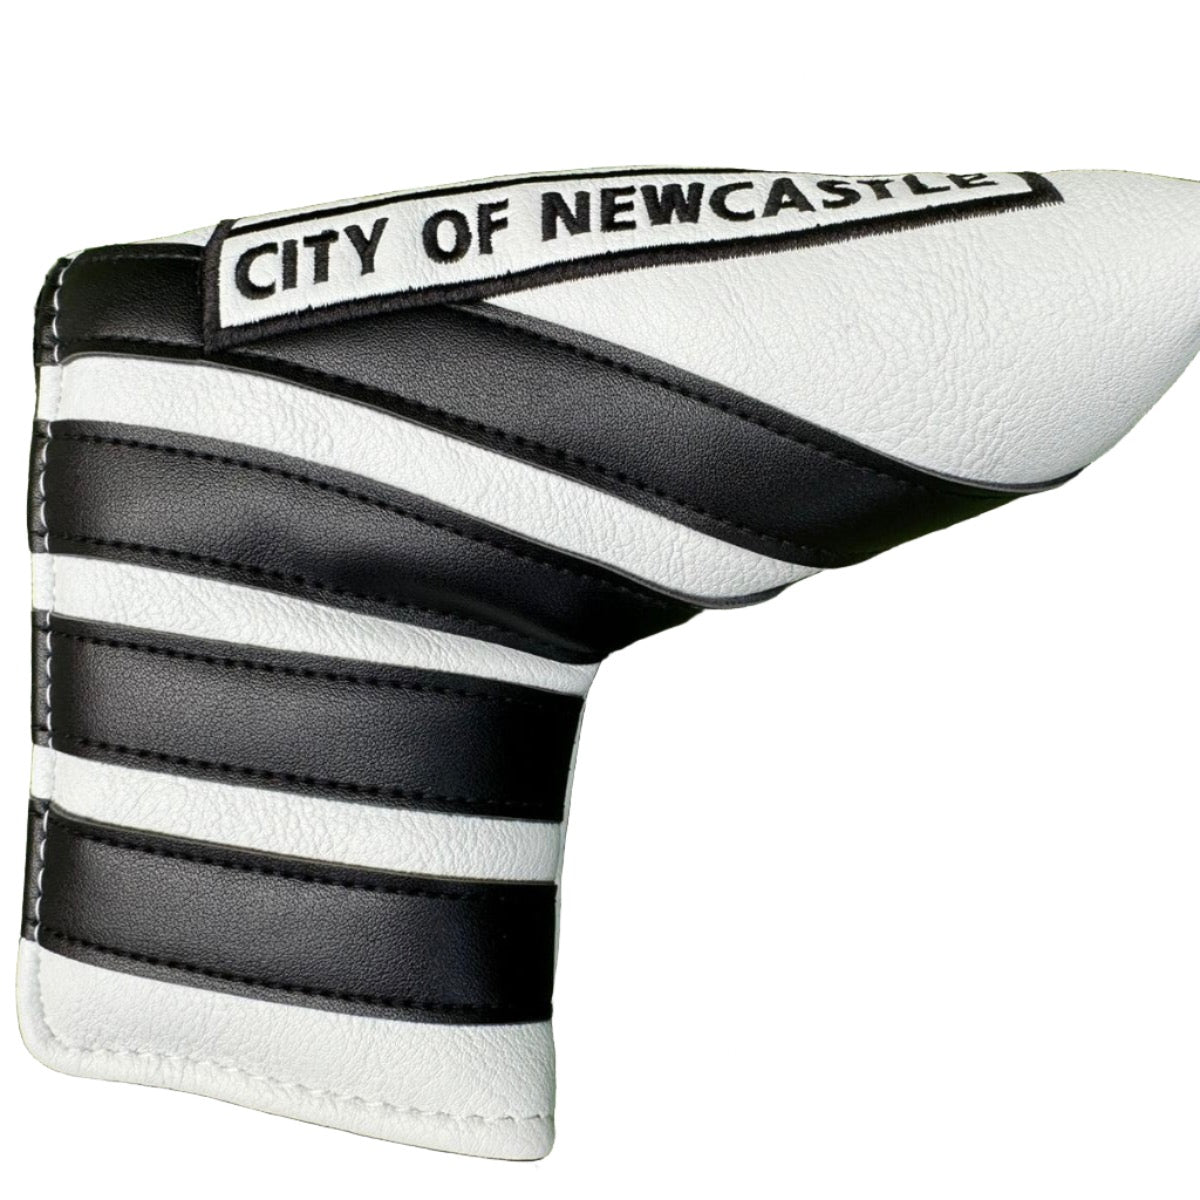 Newcastle Blade Putter Cover